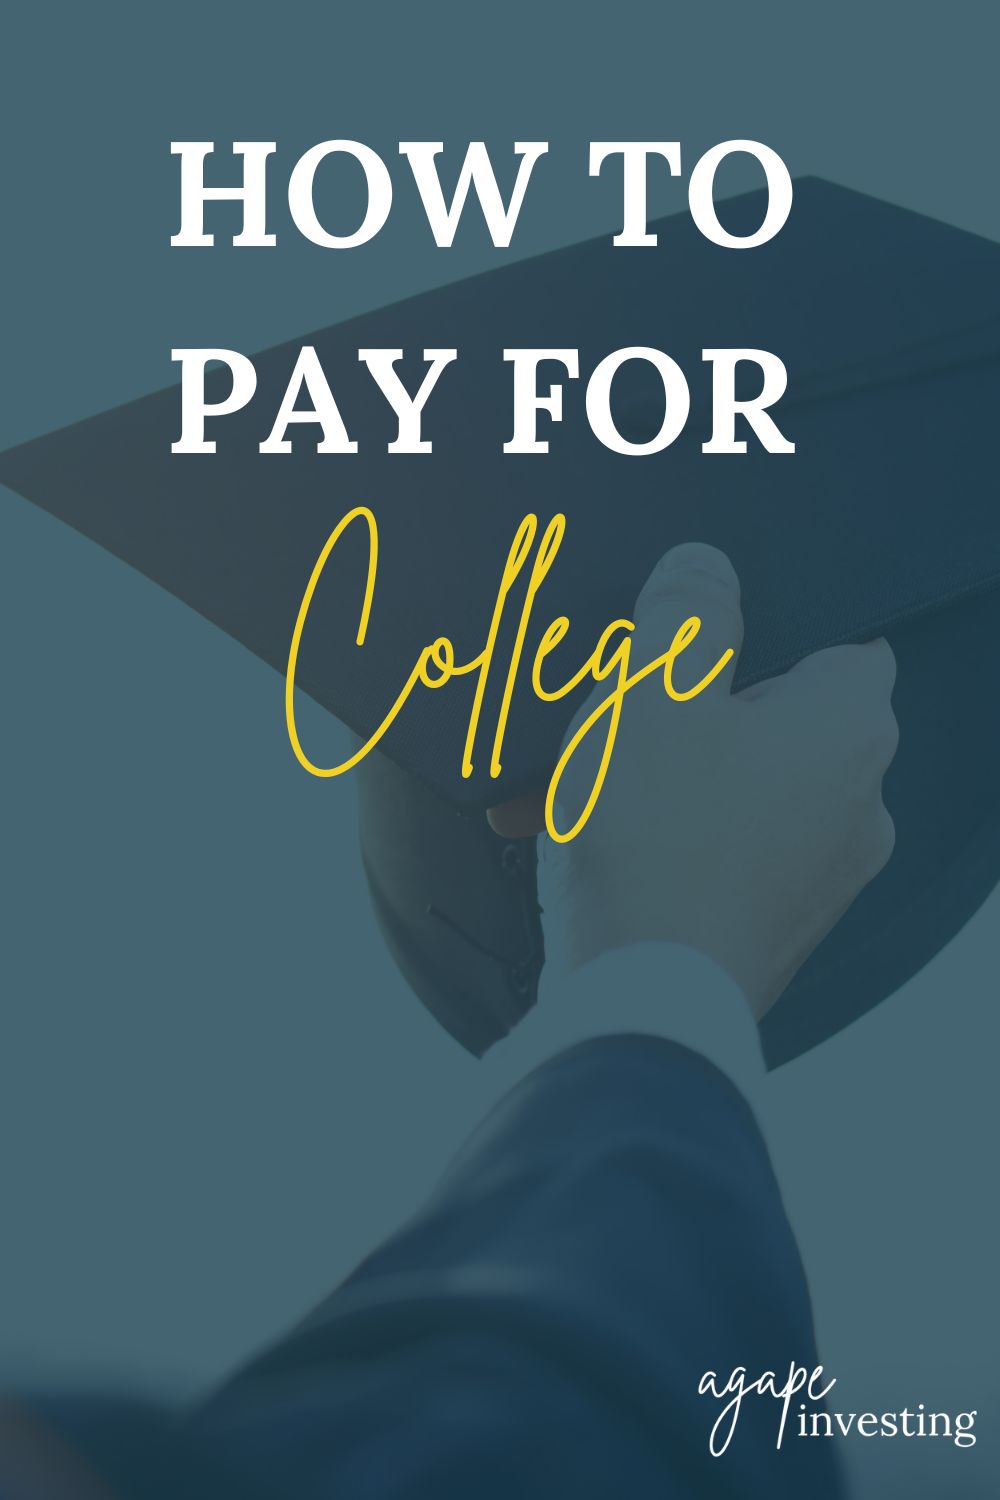 College can be one of the biggest expenses of your life. And if you are going to school for the first time or the second time, and are anything like the students in our church’s youth group, you might be wondering how in the world you are going to pay for college. In this article, I will give some ideas I have and resources you can use!